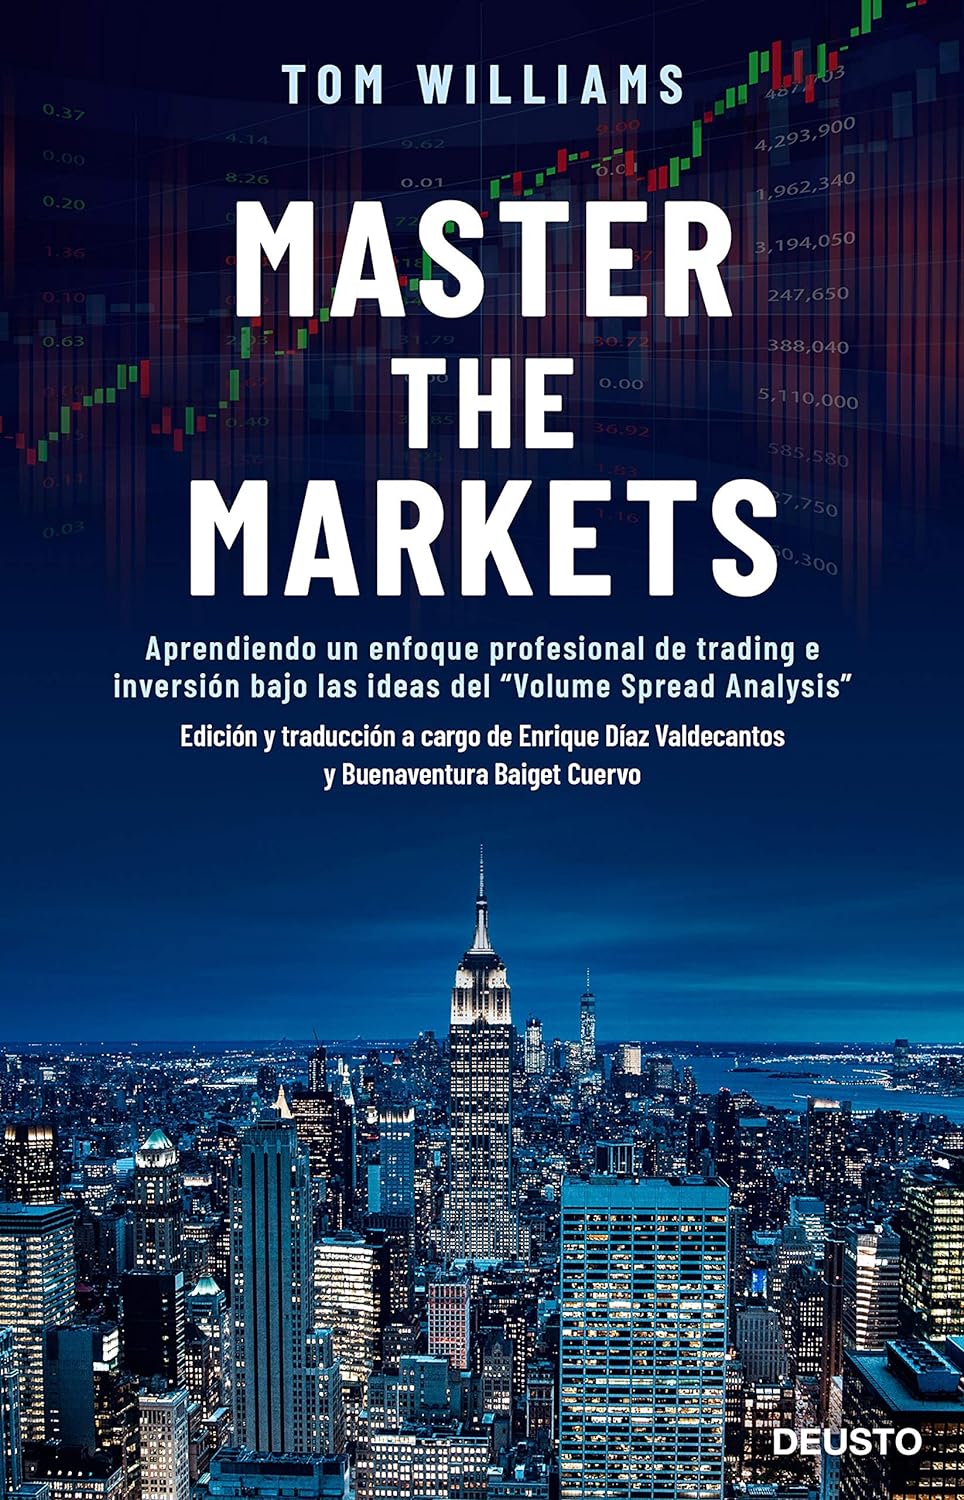 Master the Markets by Tom Williams (Spanish Version)